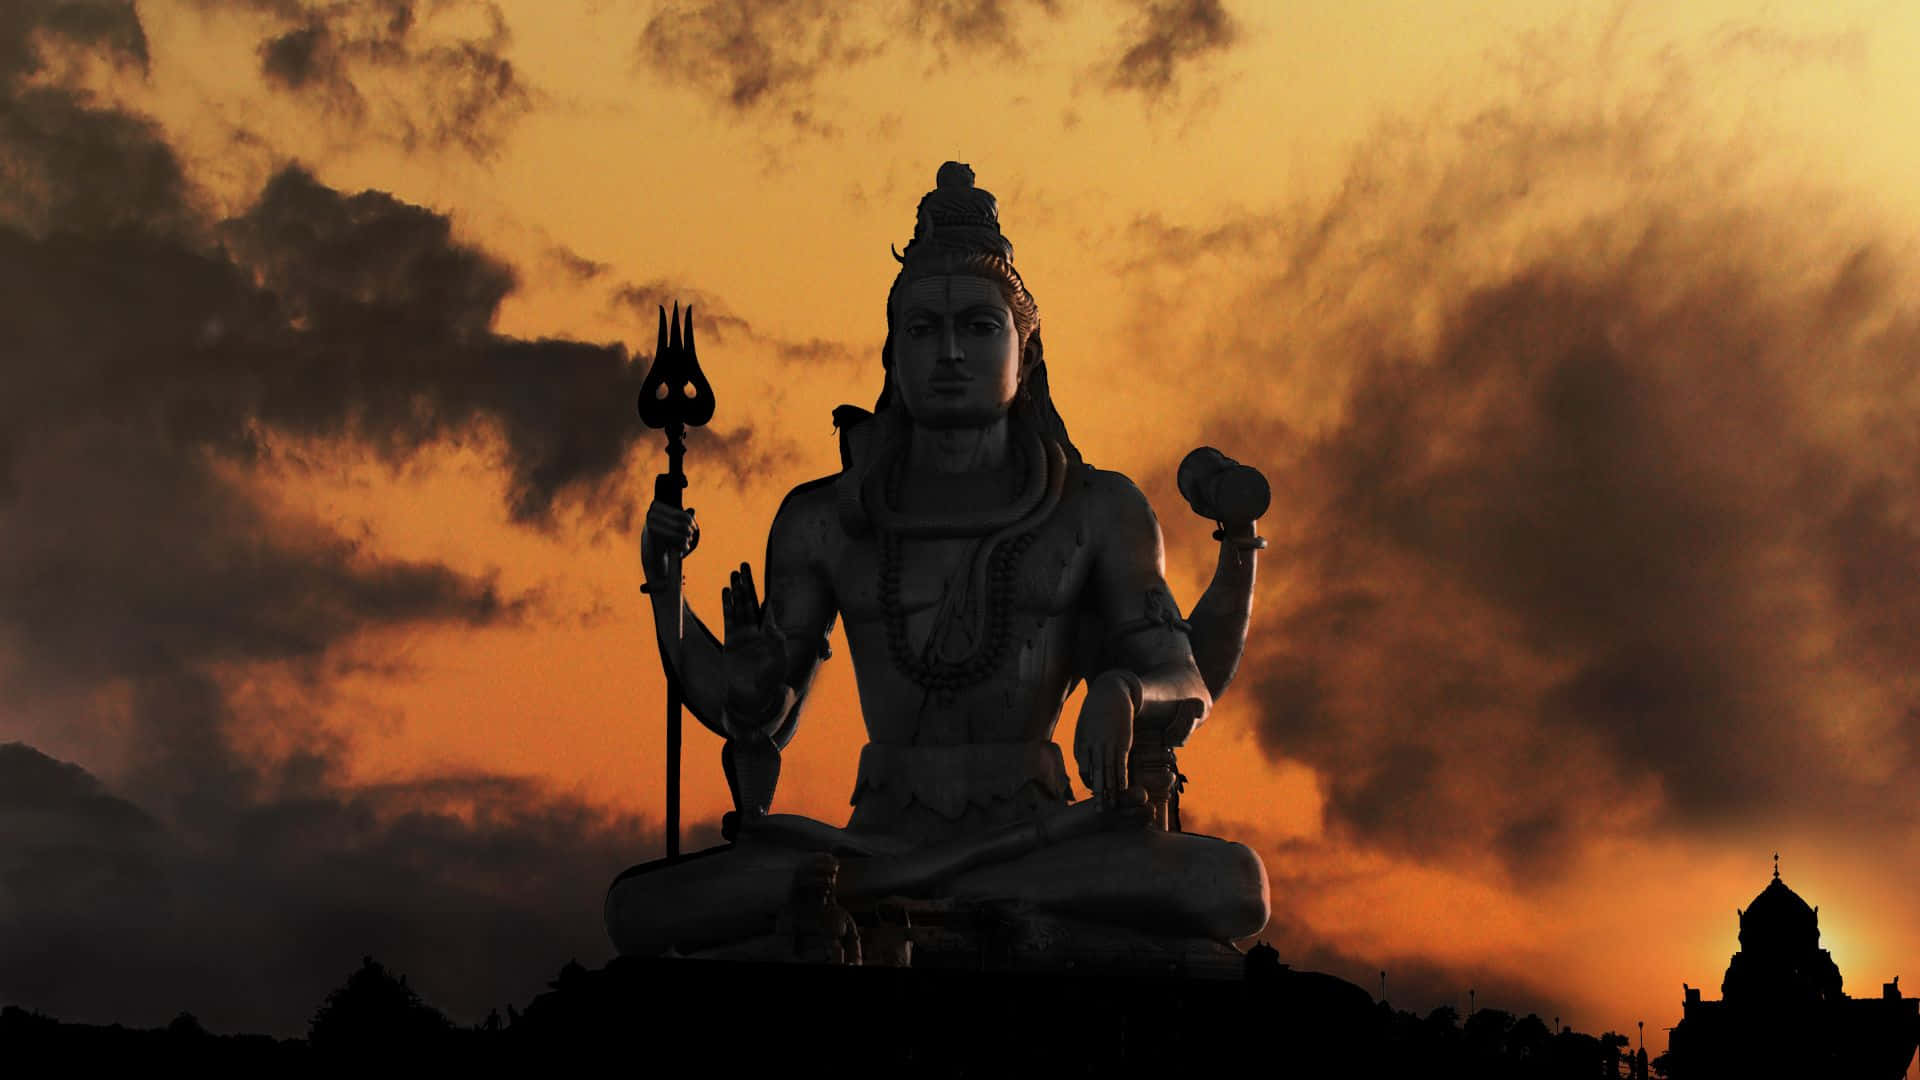 Lord Shiva, The Destroyer